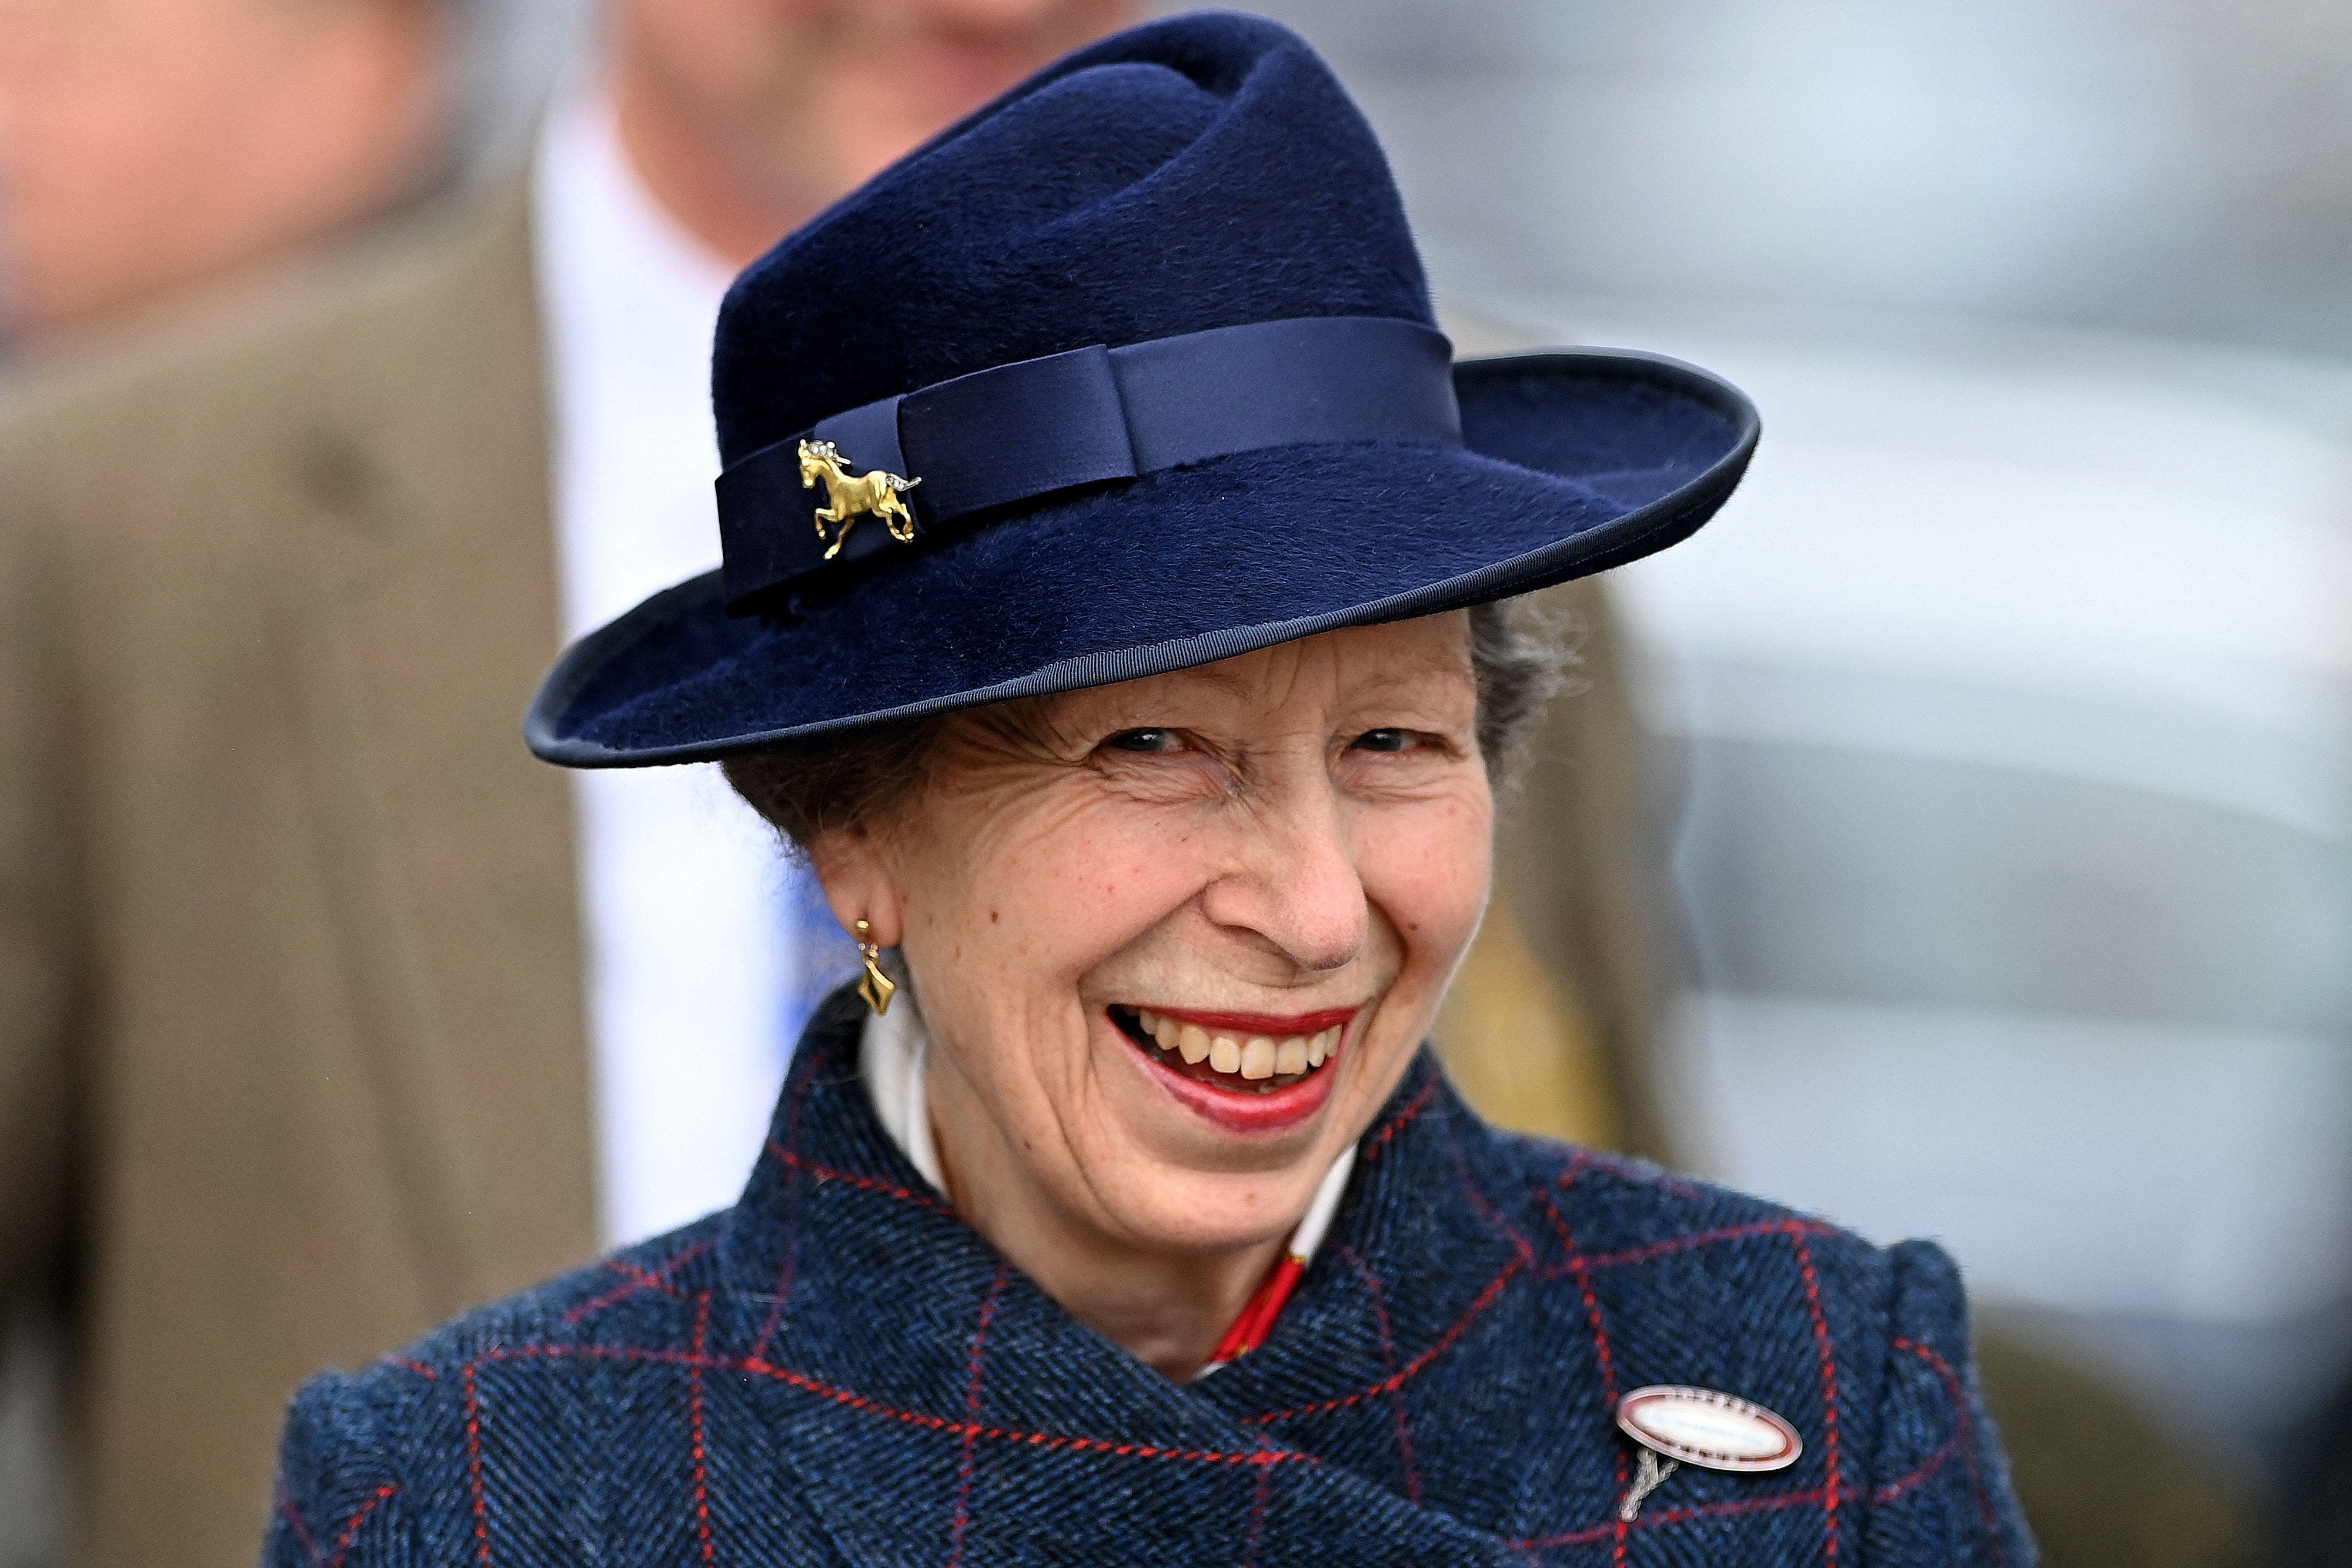 Princess Anne leaves hospital, returns home after suffering concussion from horse-related incident